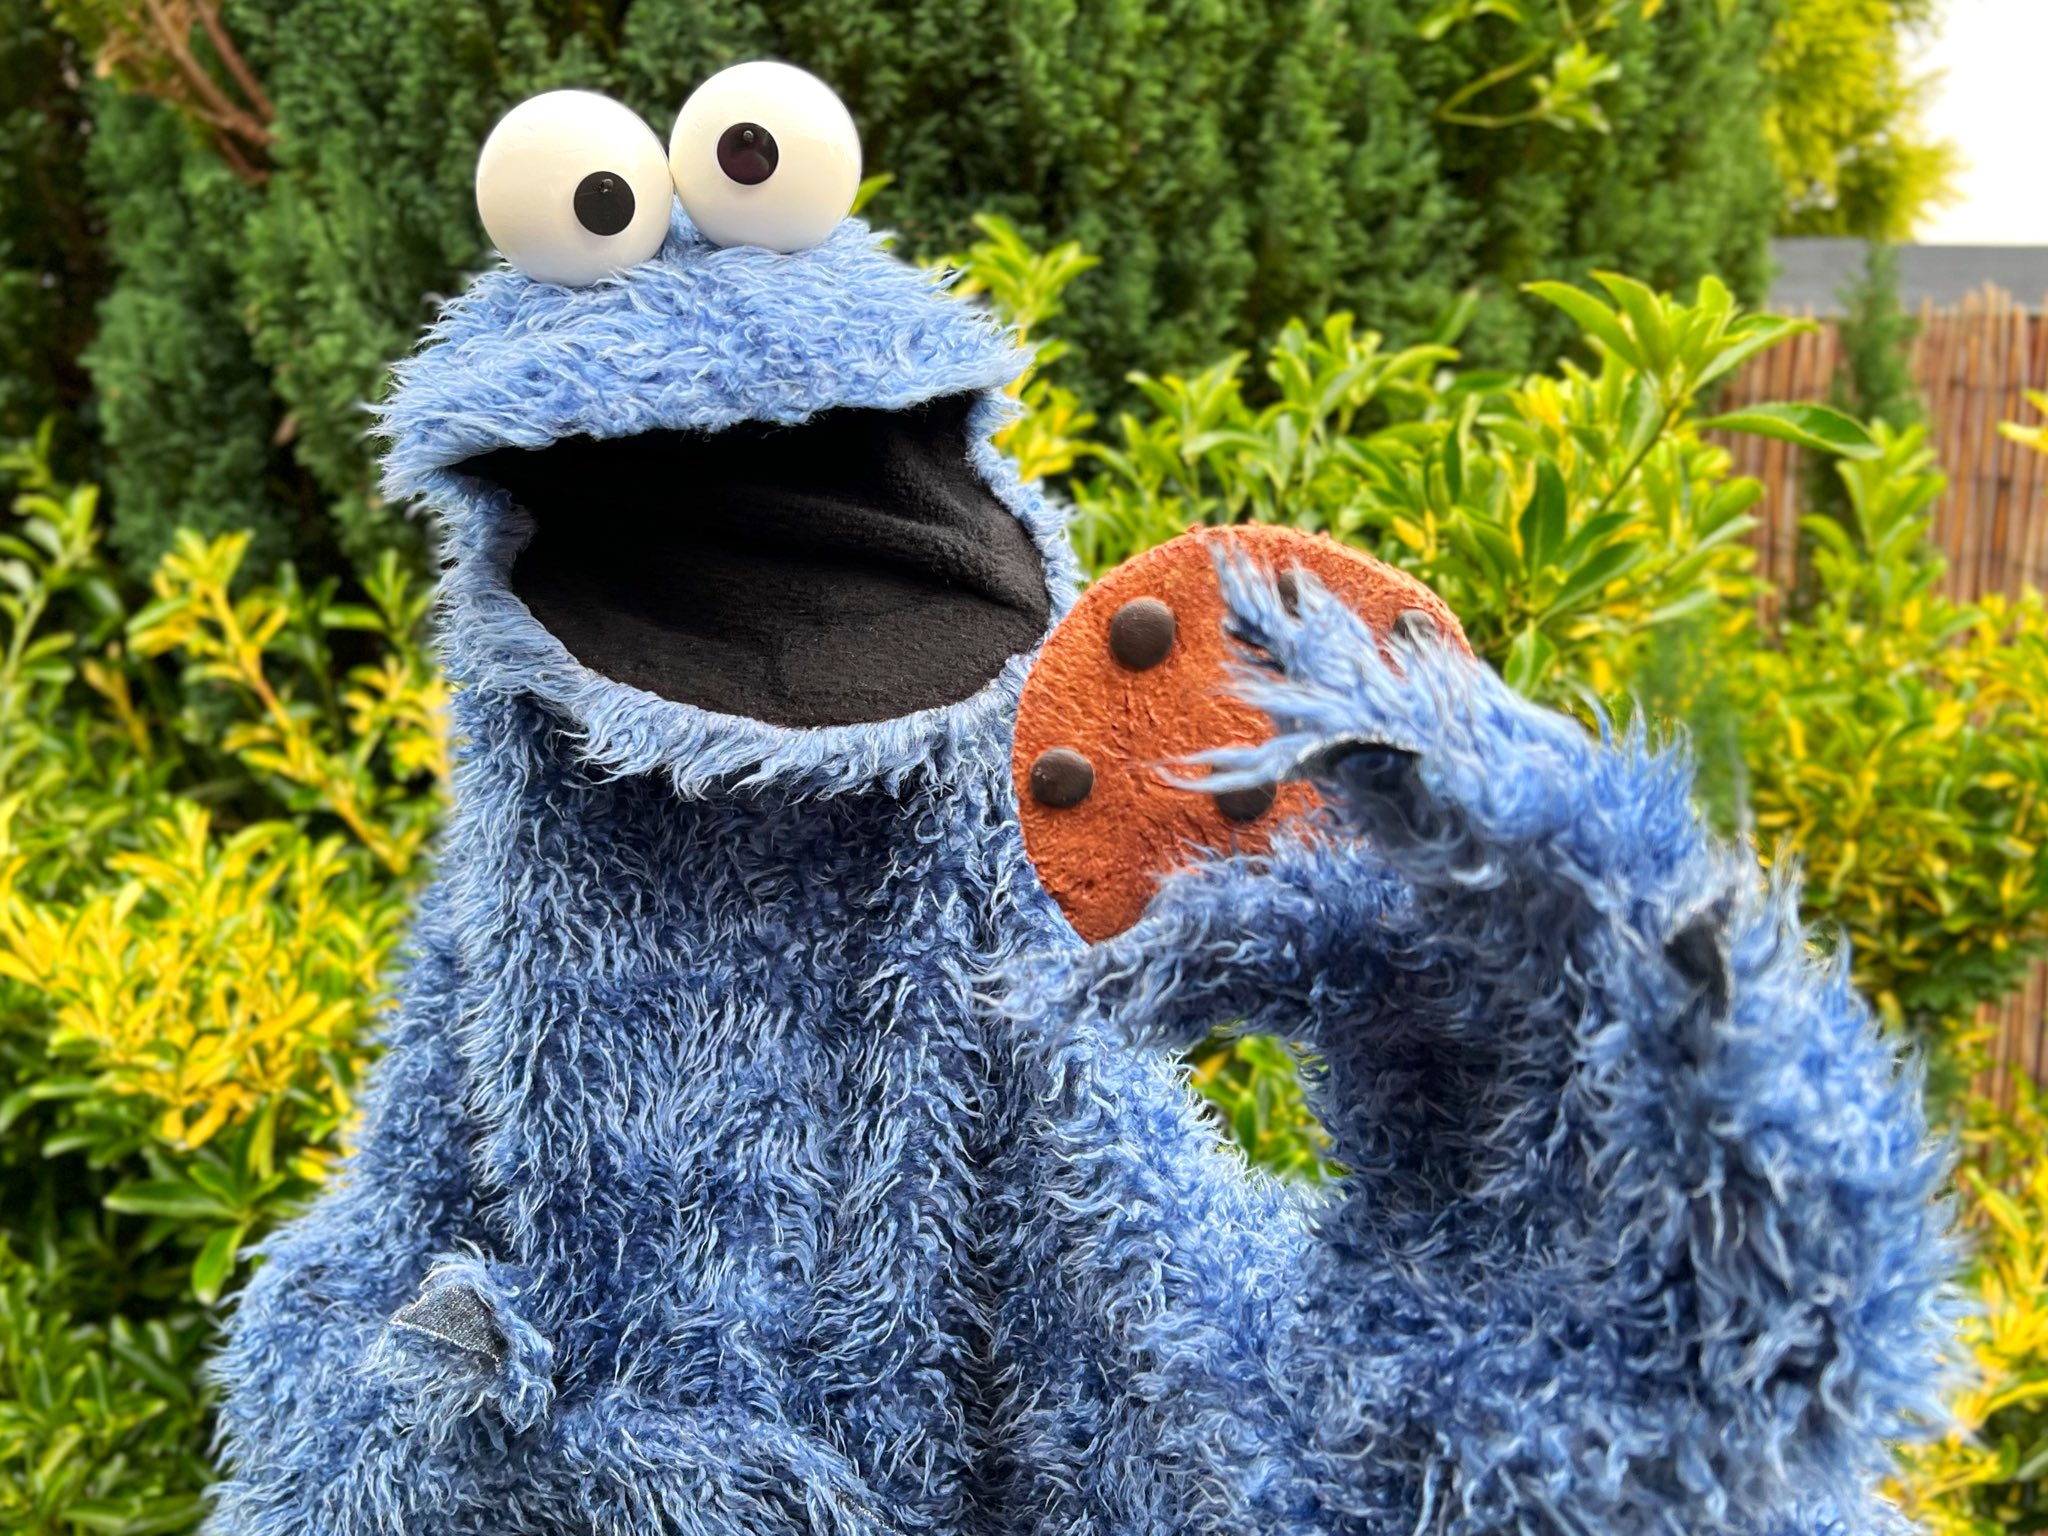 Phil Fletcher on X: Here are some new pics of my Cookie Monster